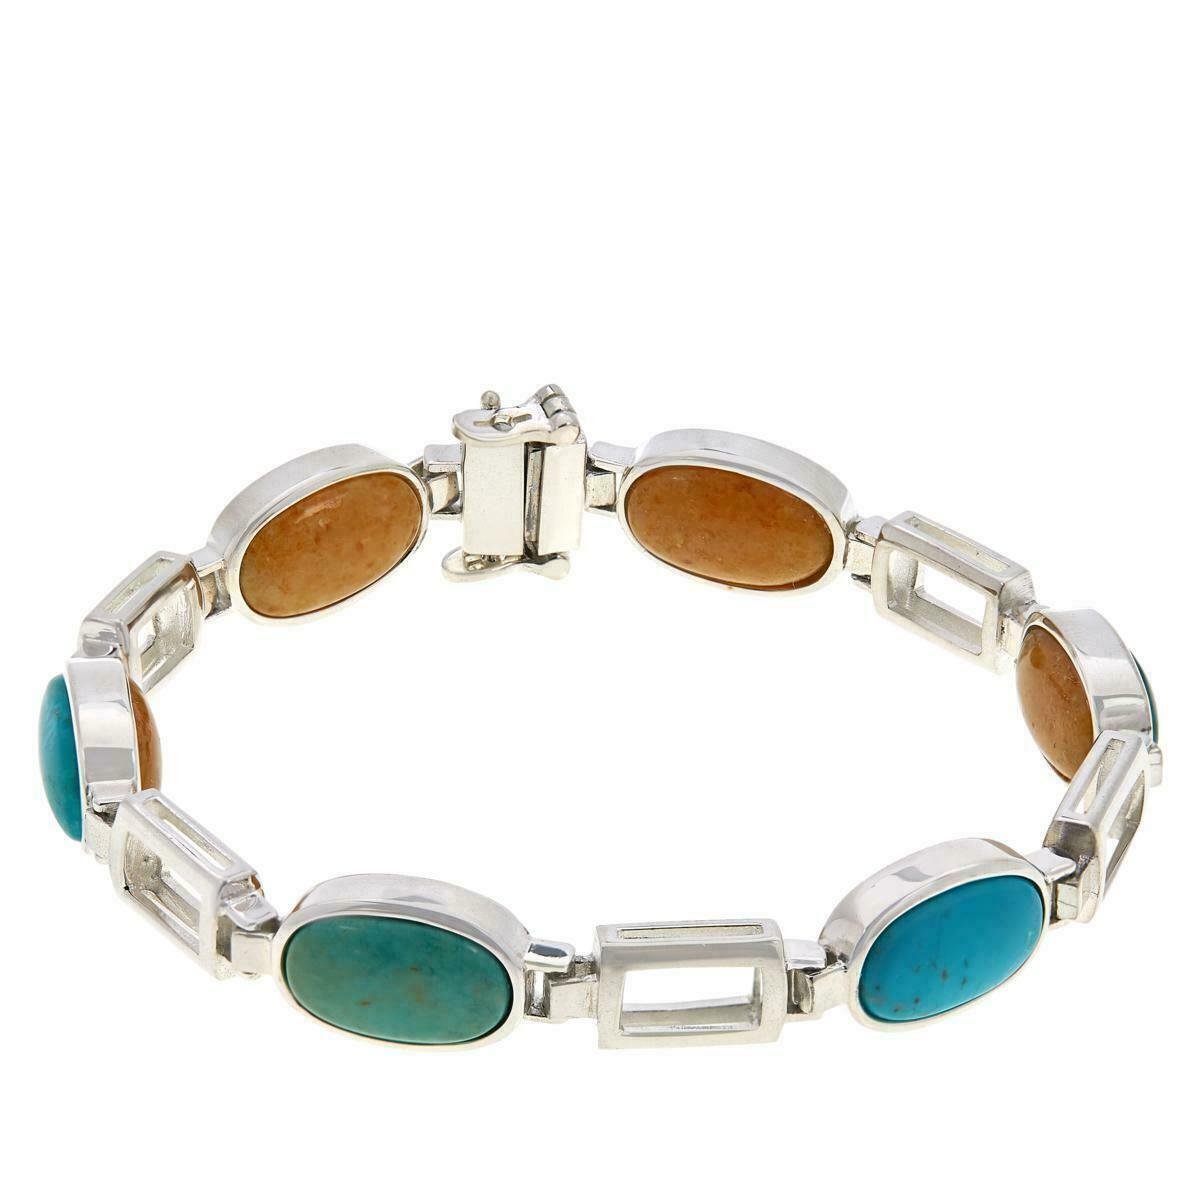 Jay King Turquoise and Butterscotch Amber Reversible Link 6-3/4 "L Bracelet $200